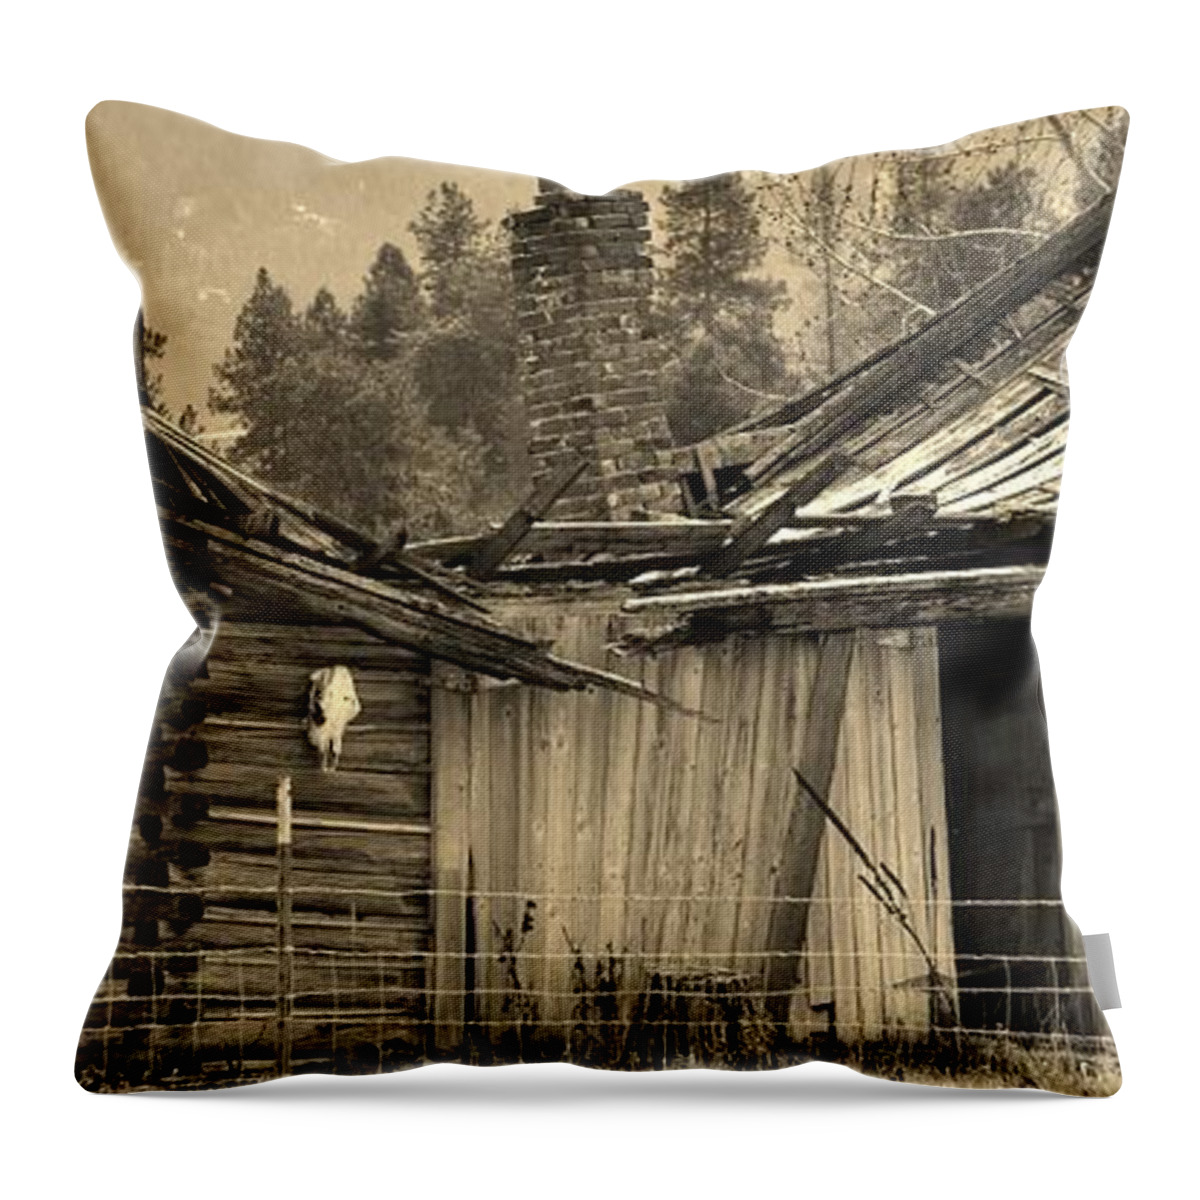 Homestead Throw Pillow featuring the photograph Once Loved by Jimmy Chuck Smith